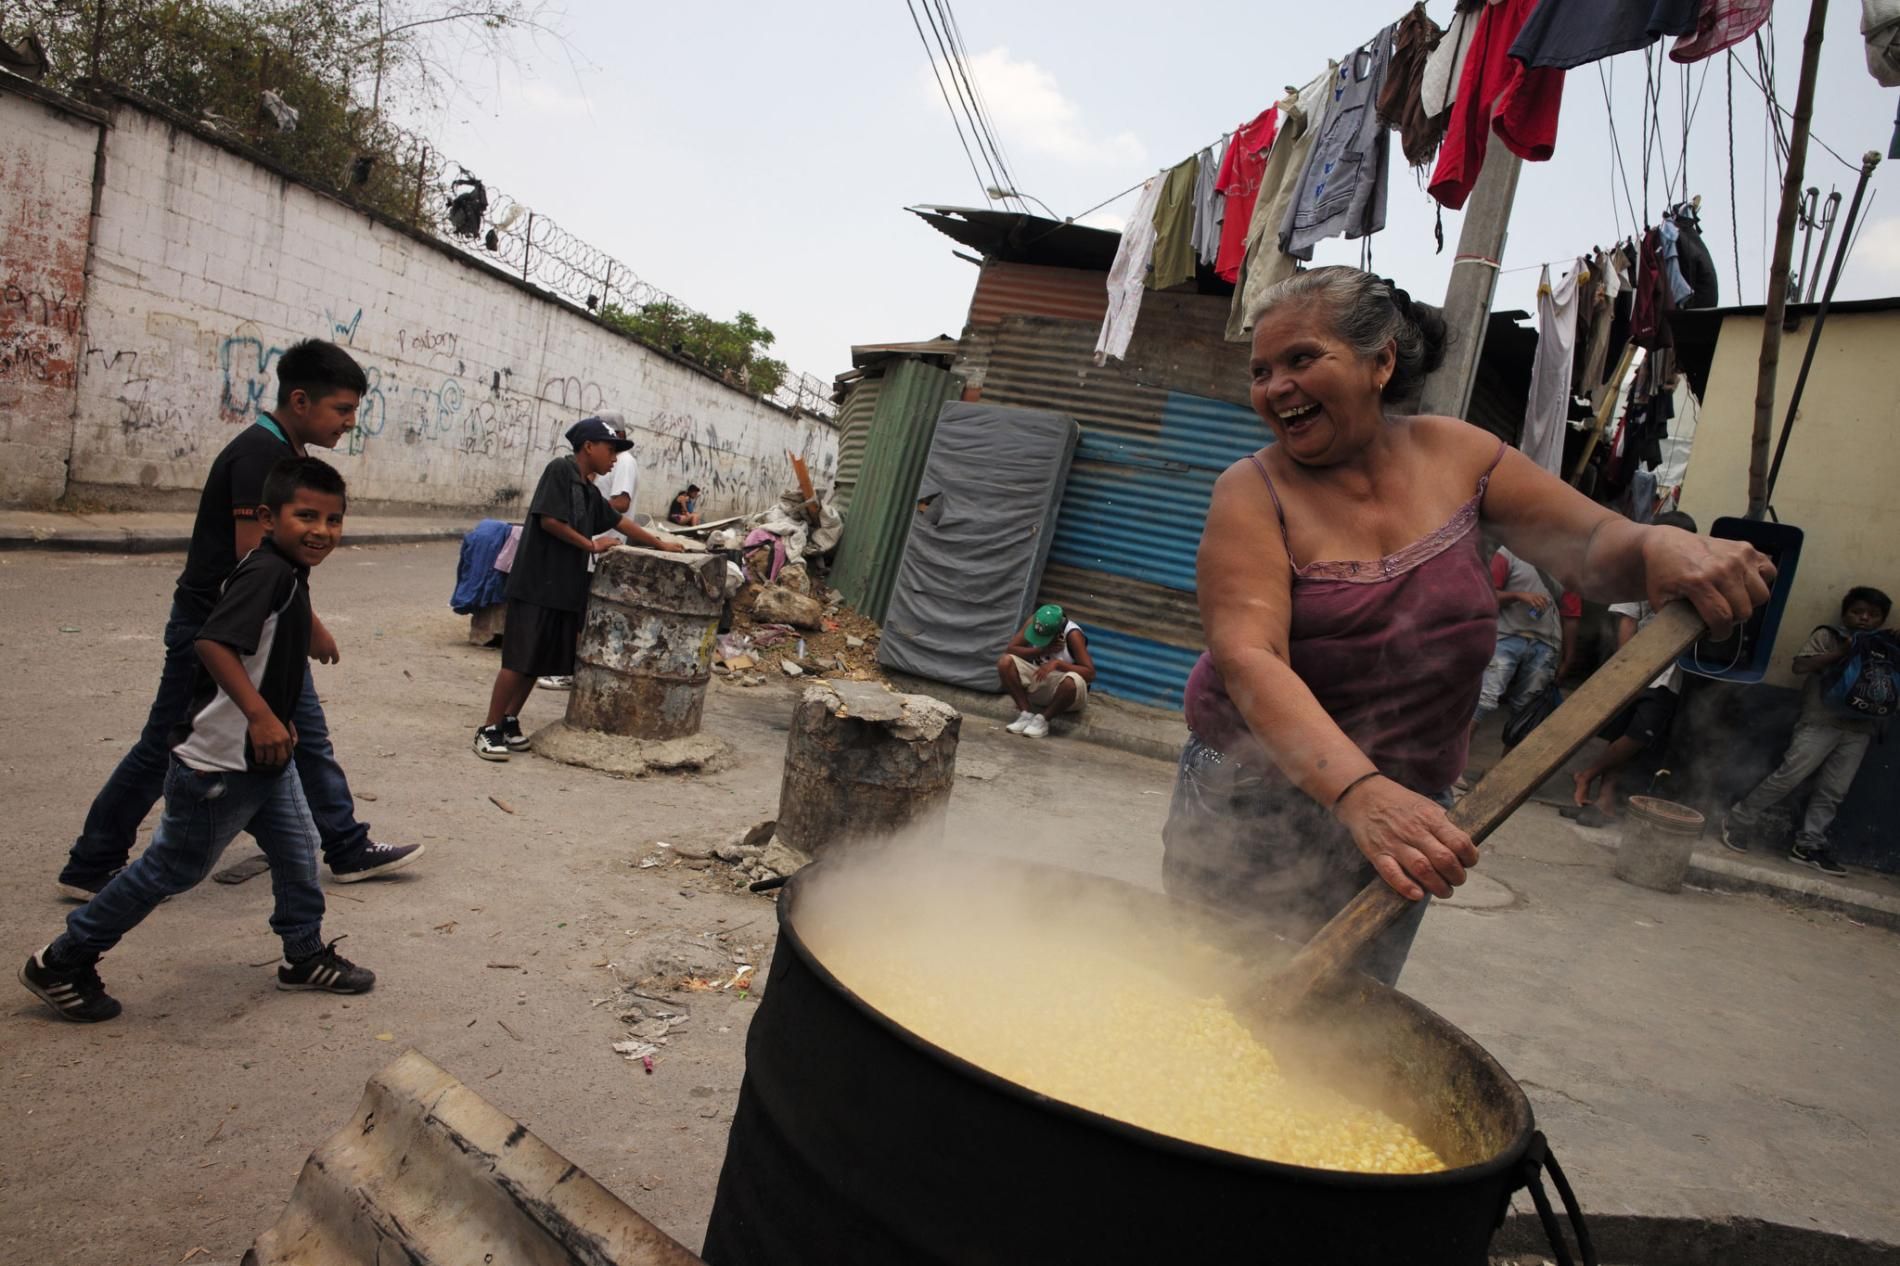 Alma Iris Garay, 50, who fled violence in El Salvador as a child, who has lost a son to drugs, beams as she stirs her vat of corn on a street corner, where the smoke from the open fire won’t choke her. She makes tortillas on a gas stove inside her home in Guatemala City. Image by Lynn Johnson. Guatemala, 2017.